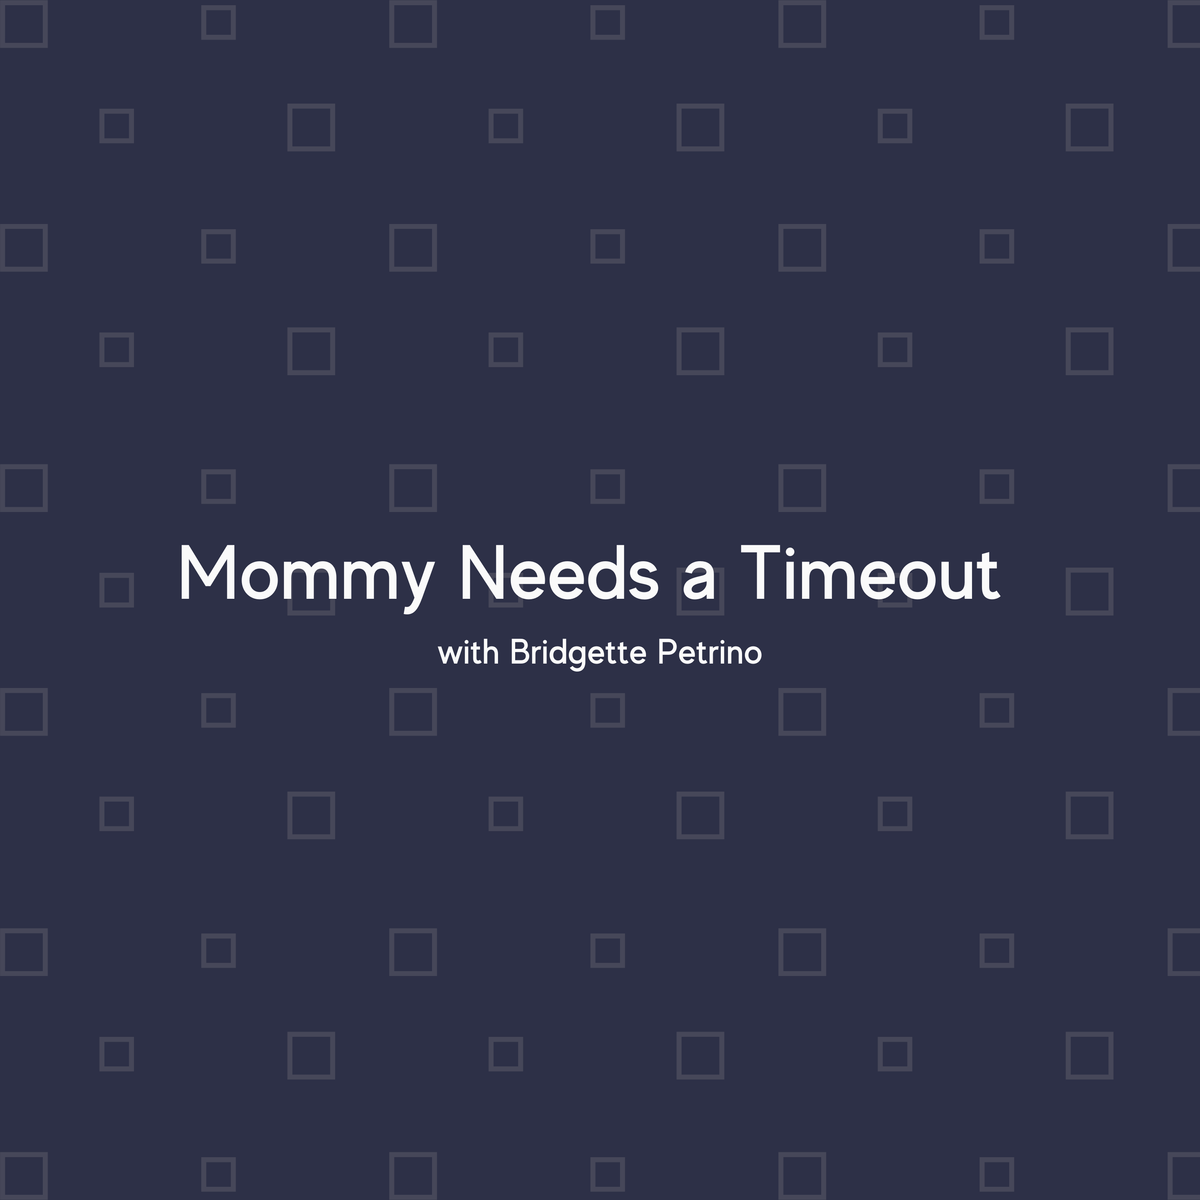 Mommy Needs a Timeout with Bridgette Petrino